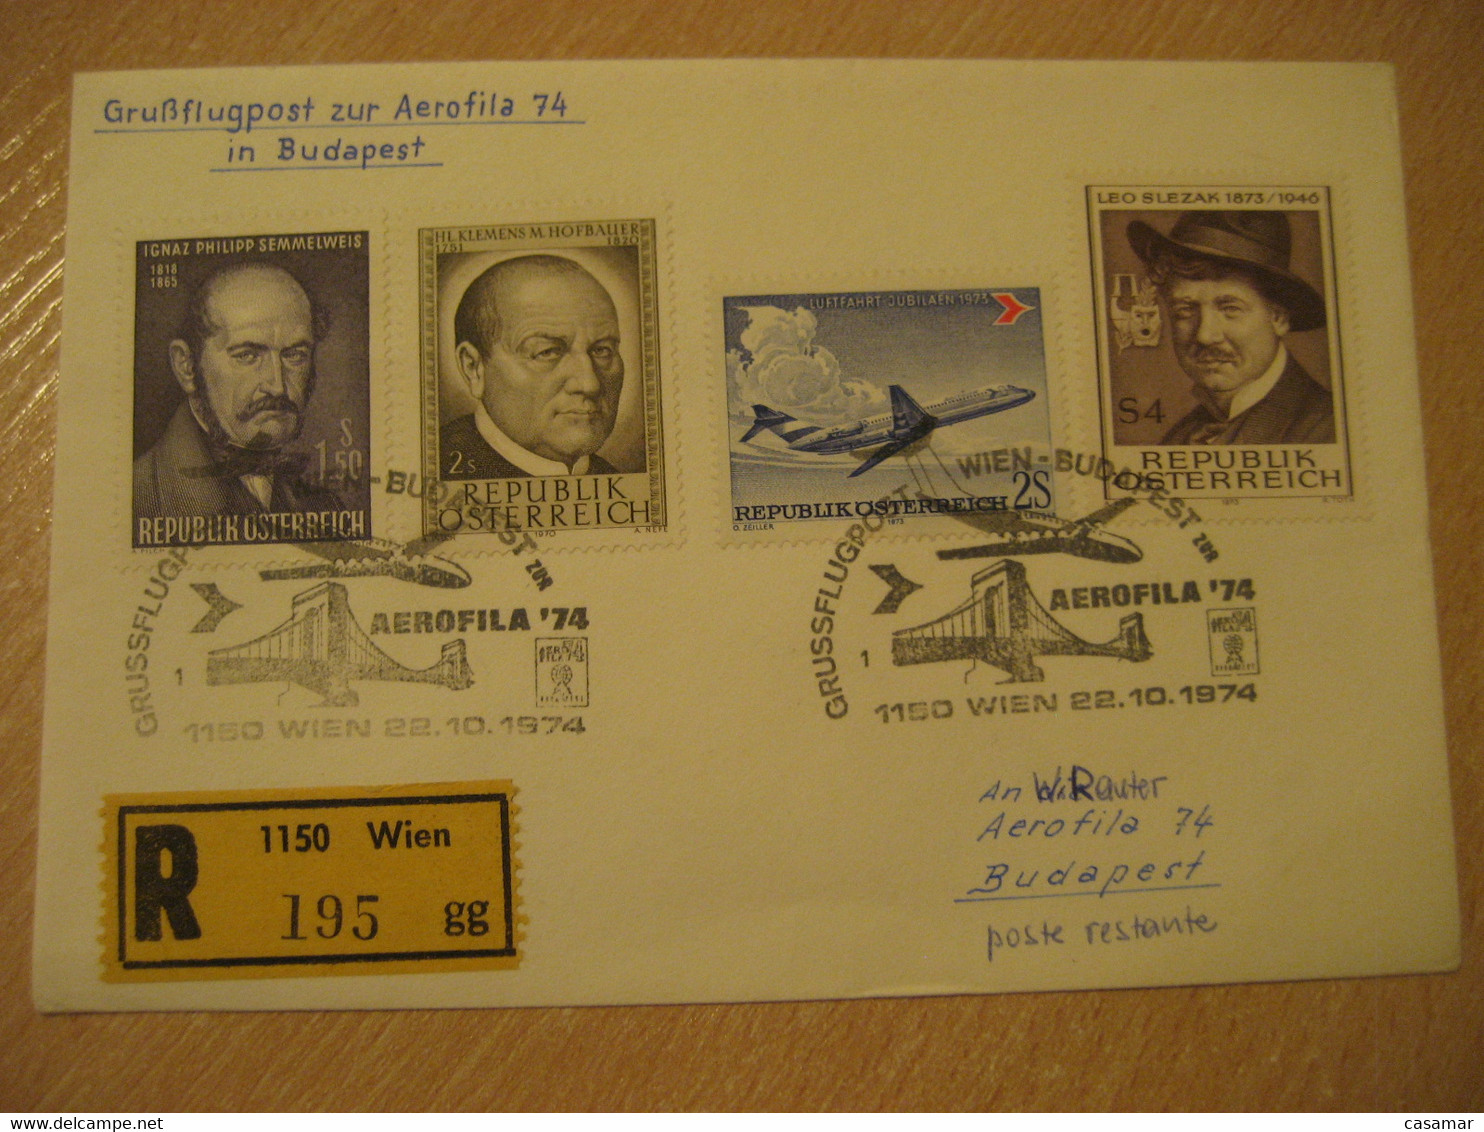 BUDAPEST Wien 1974 First Flight Cancel Registered Cover HUNGARY AUSTRIA - Lettres & Documents